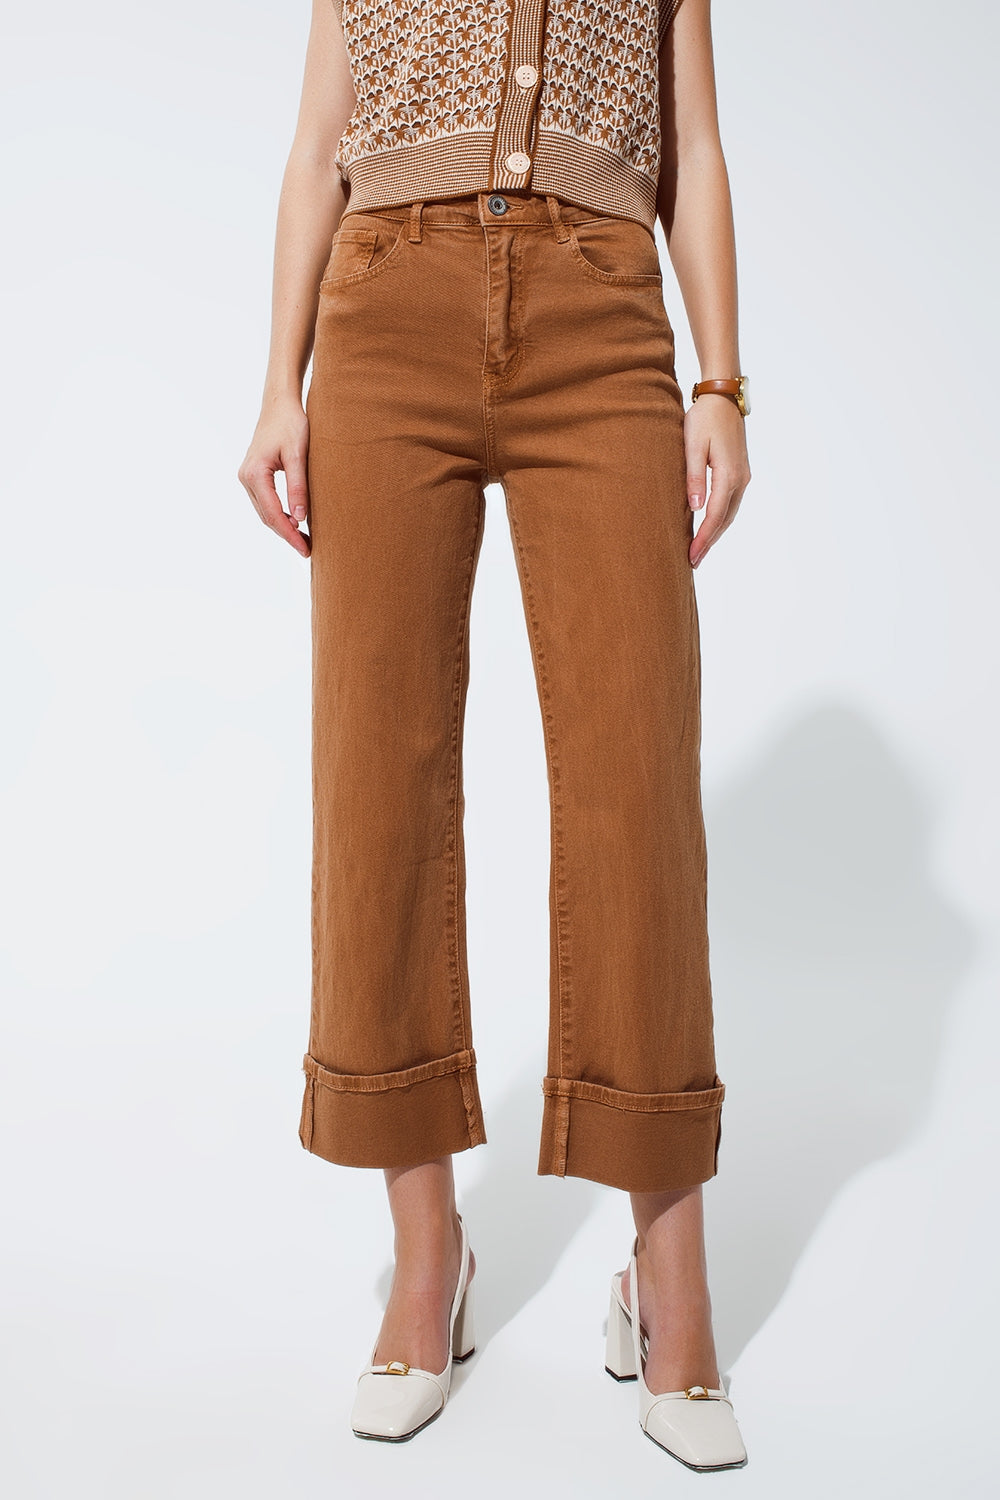 Q2 Straight leg jeans in camel with folded trouser legs